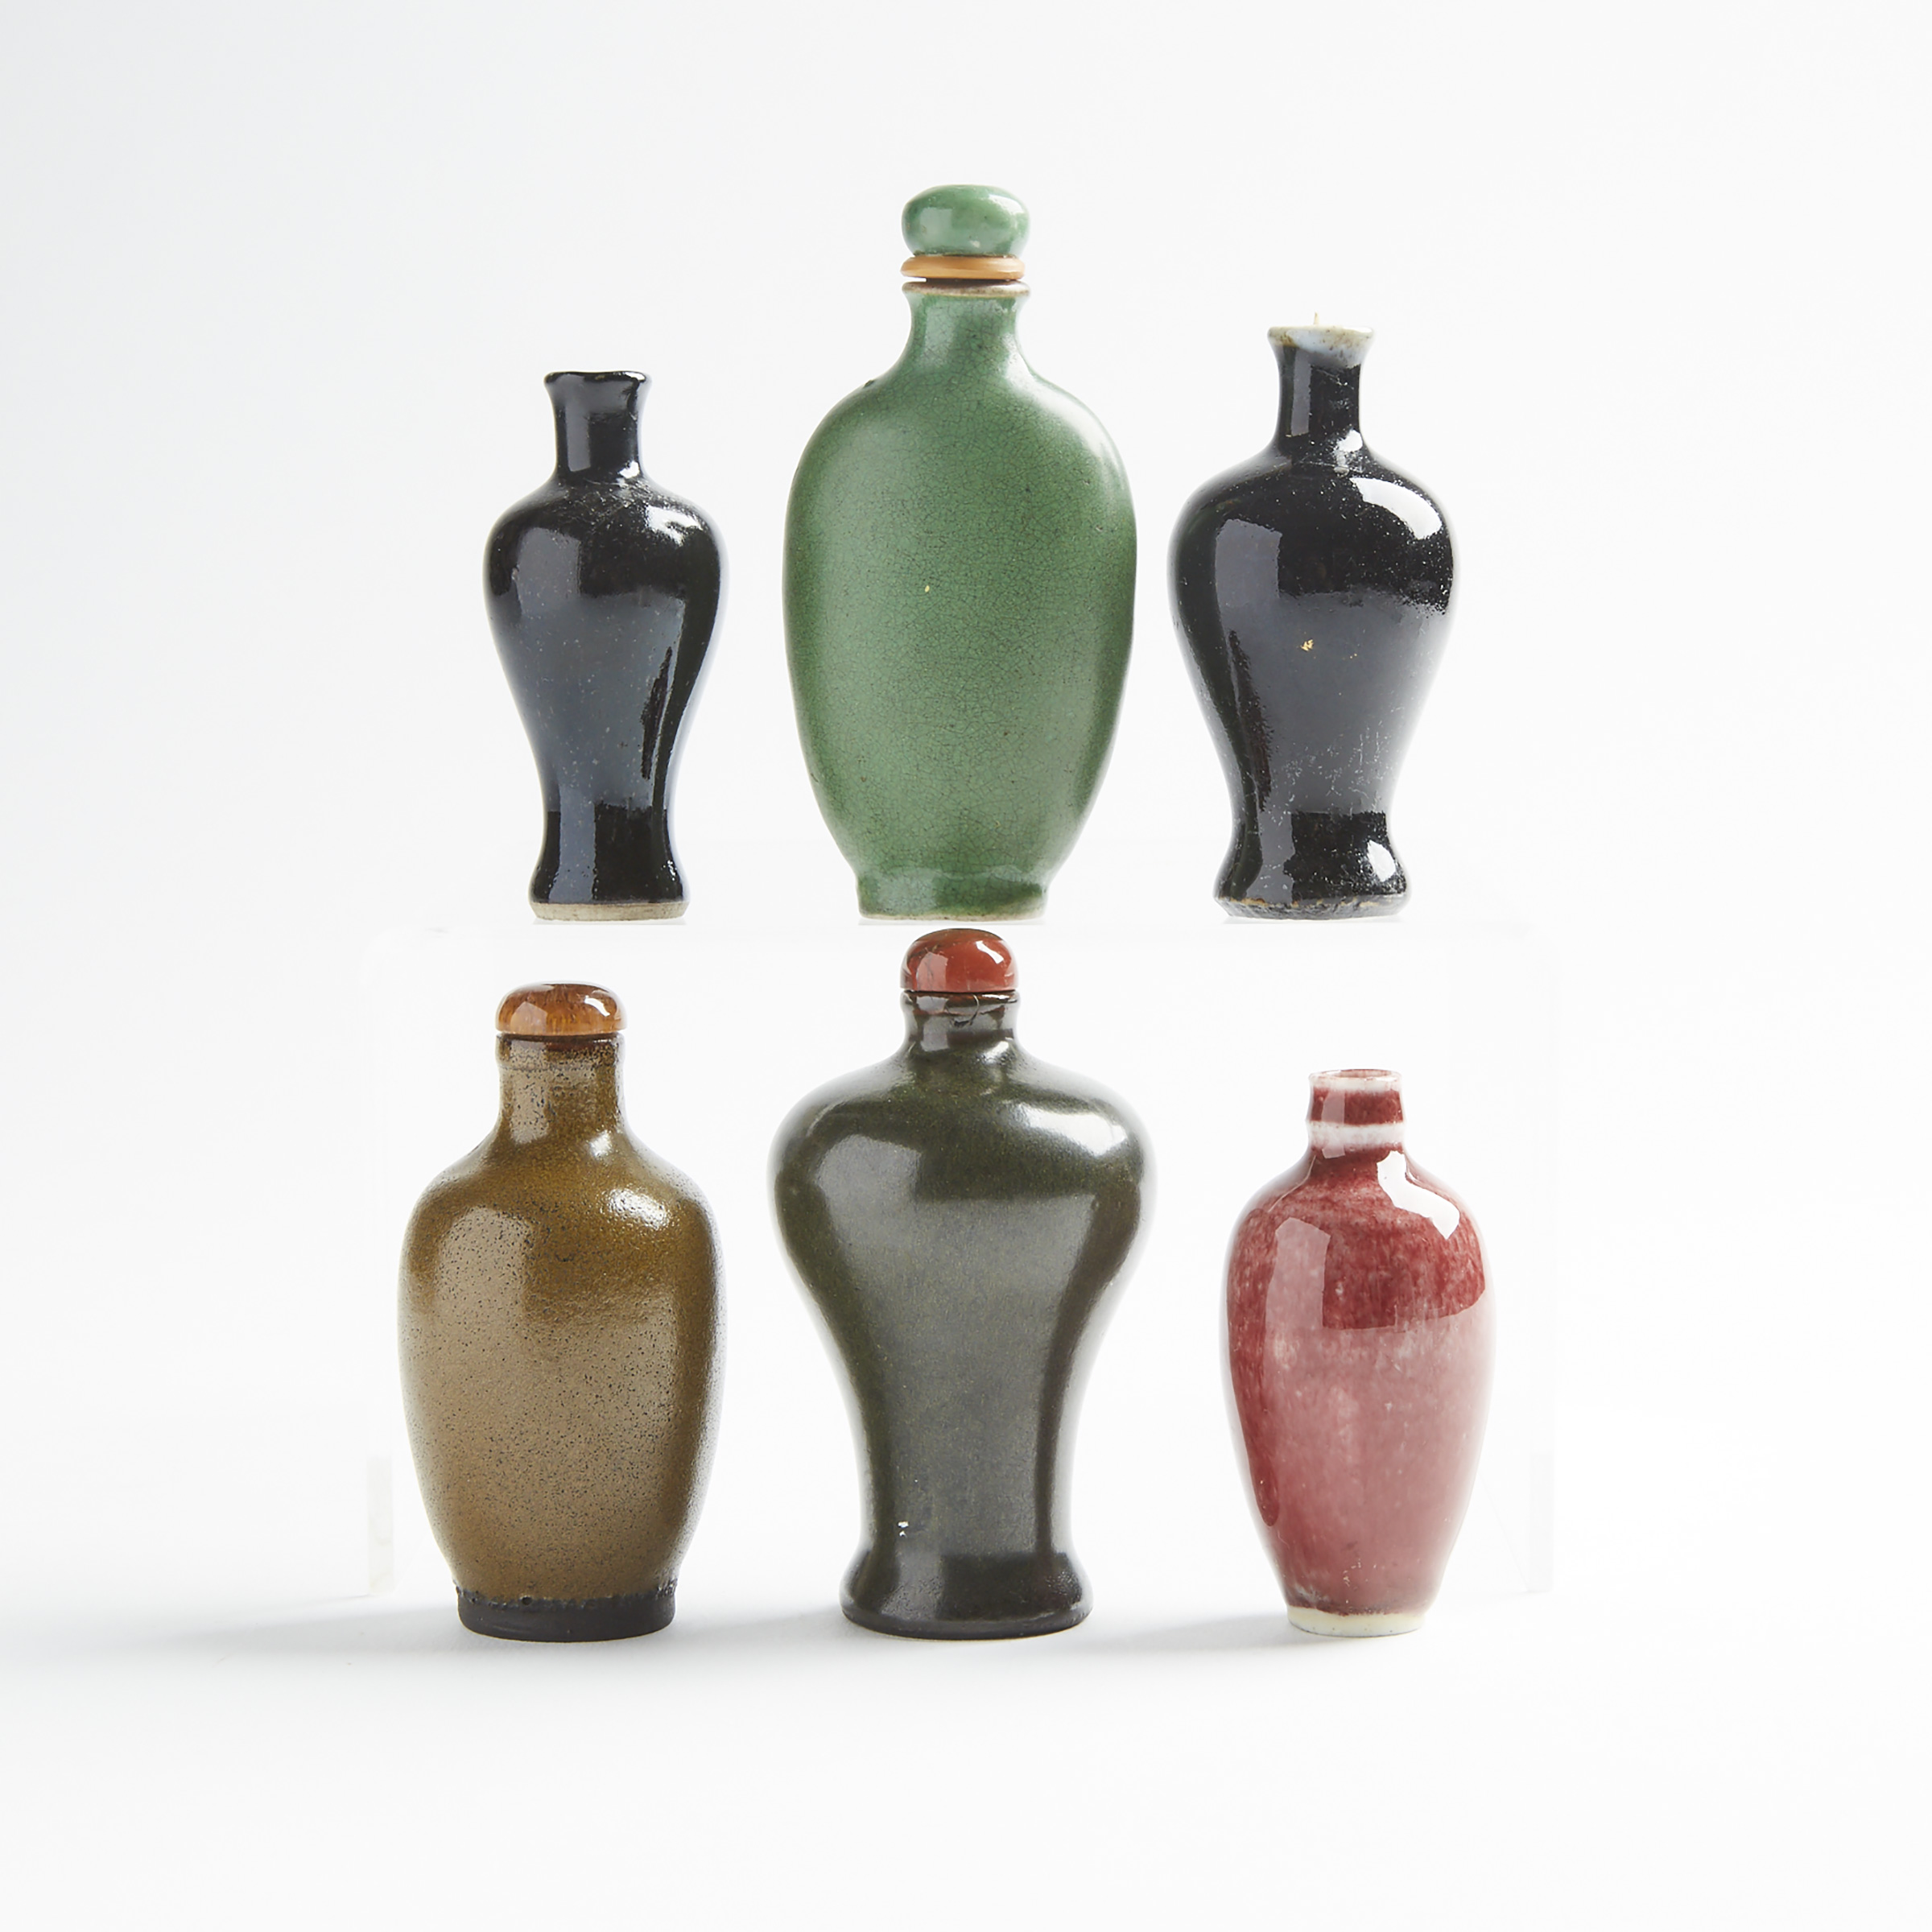 A Group of Six Monochrome Porcelain Snuff Bottles, 19th/Early 20th Century